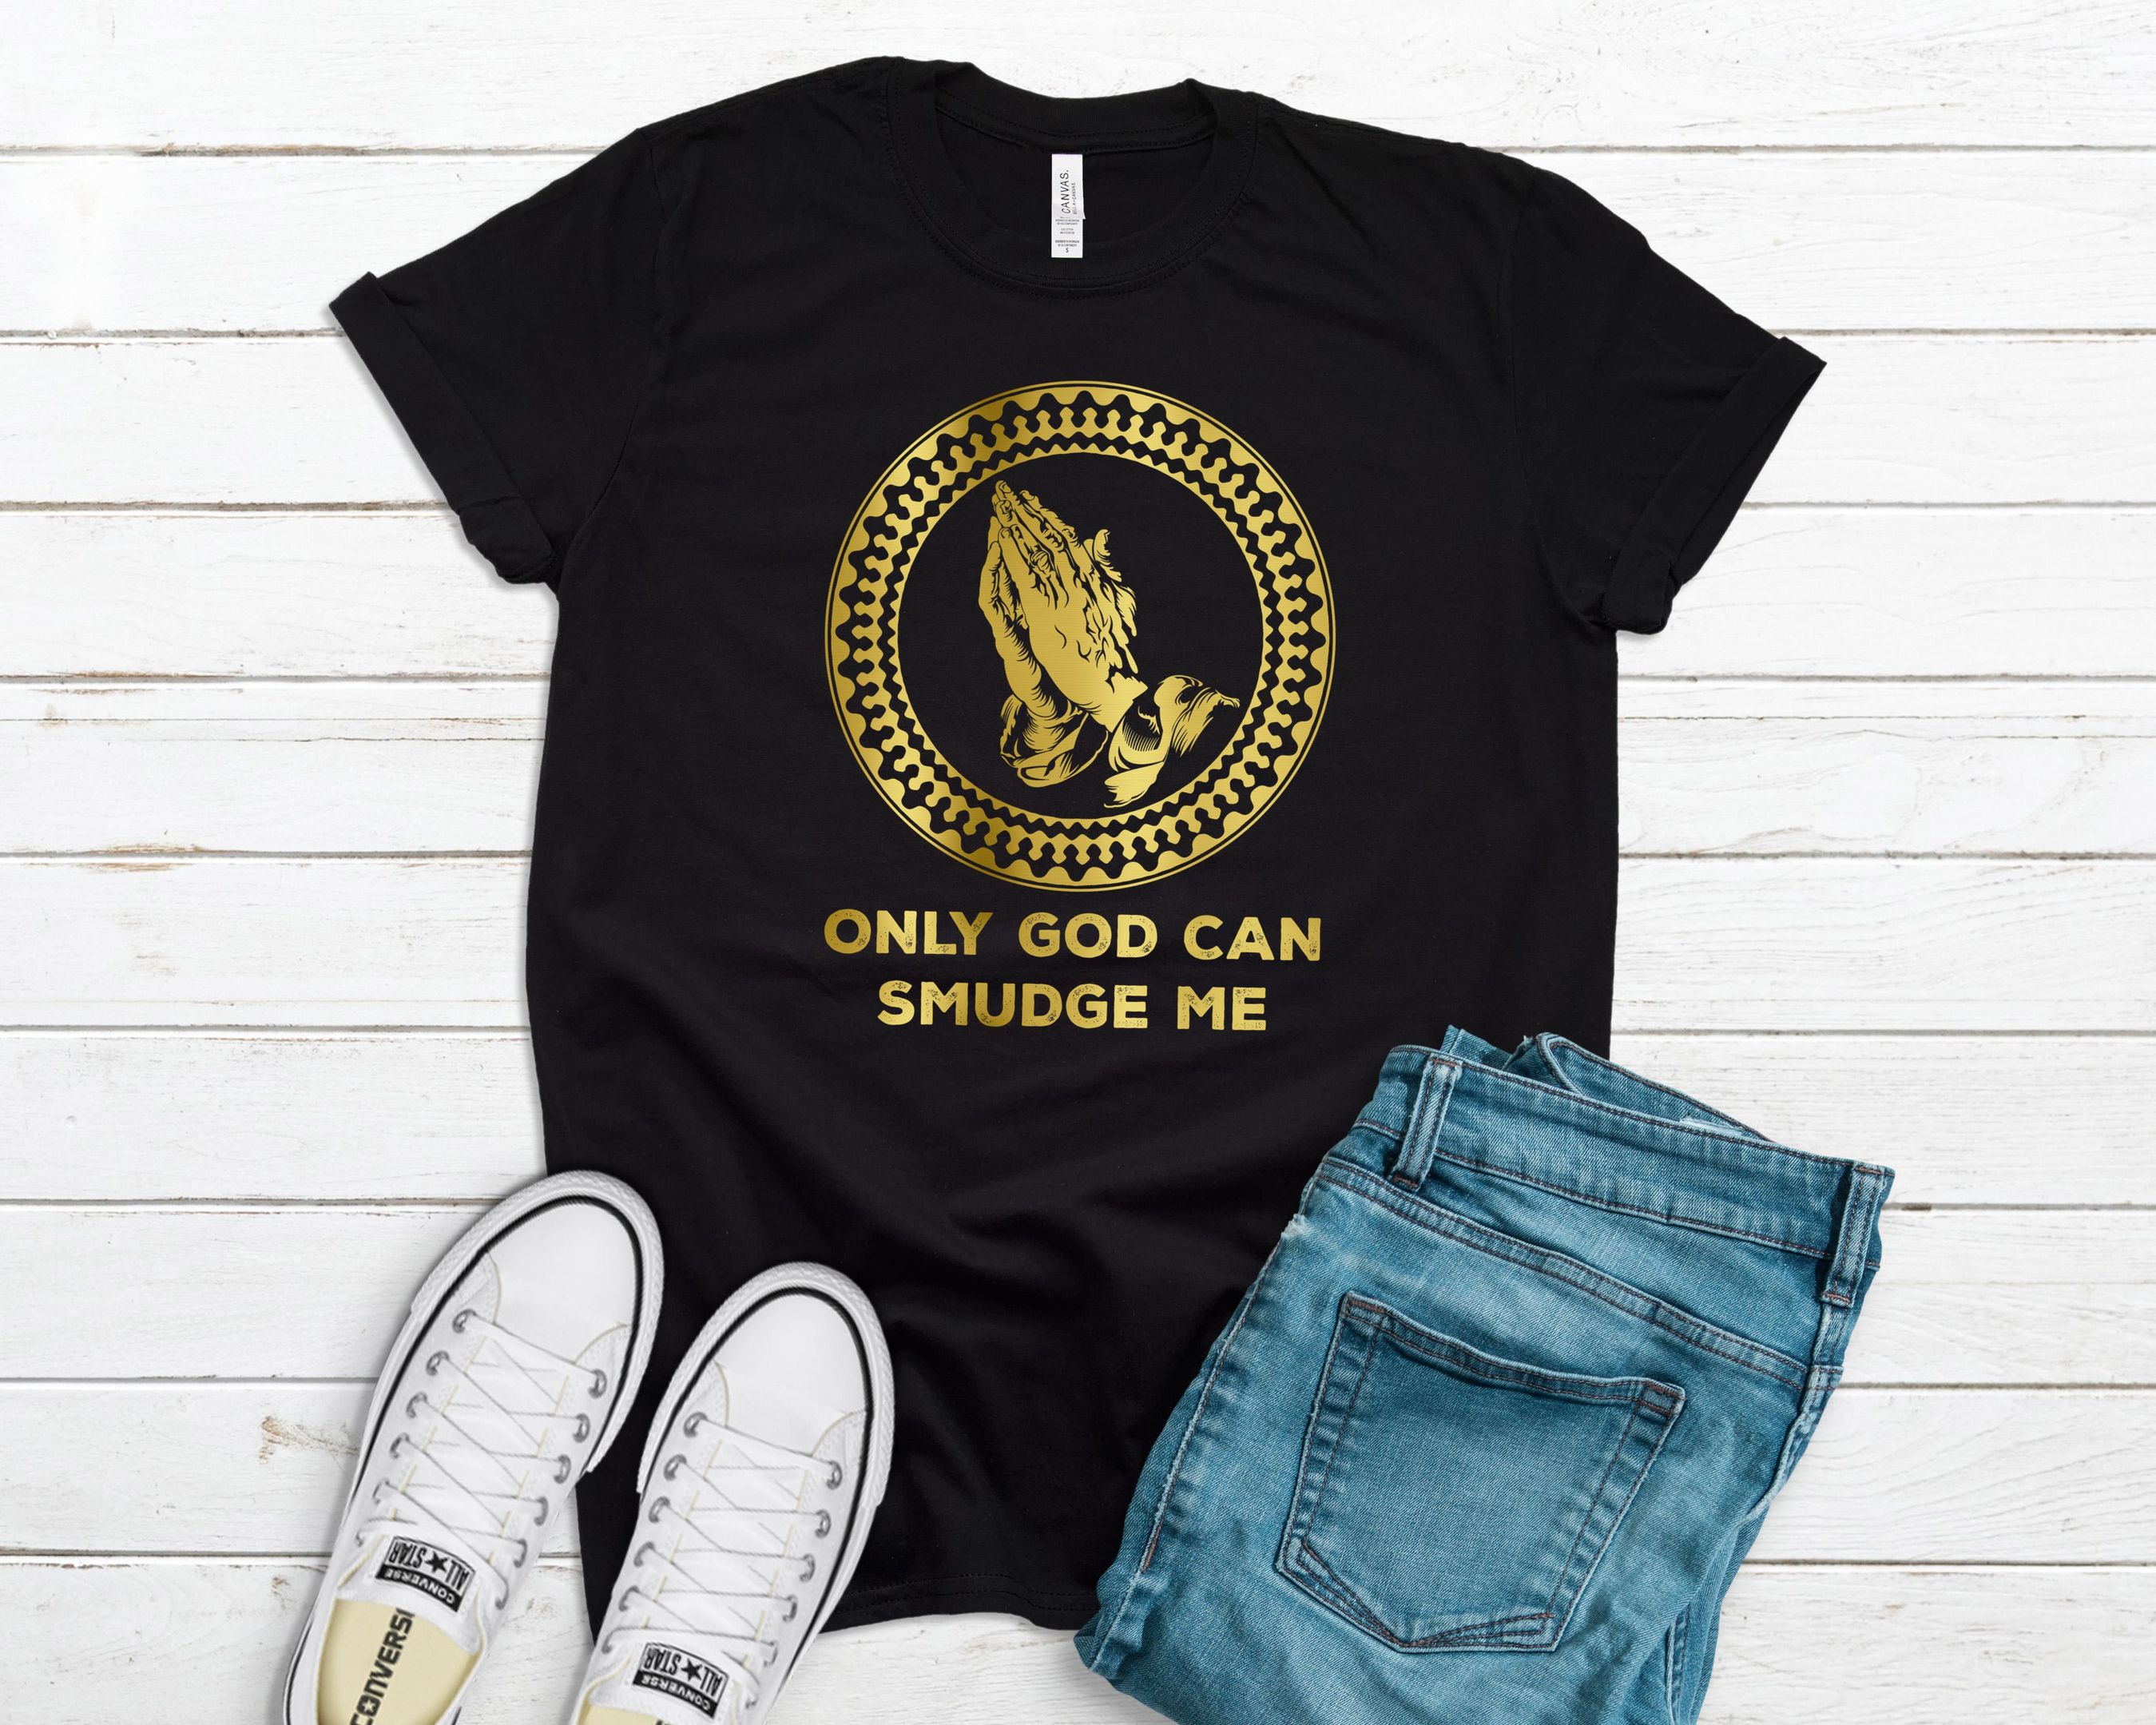 Only God Can Smudge Me Shirt, Native Shirt, Go Smudge Shirt, Native American Shirt